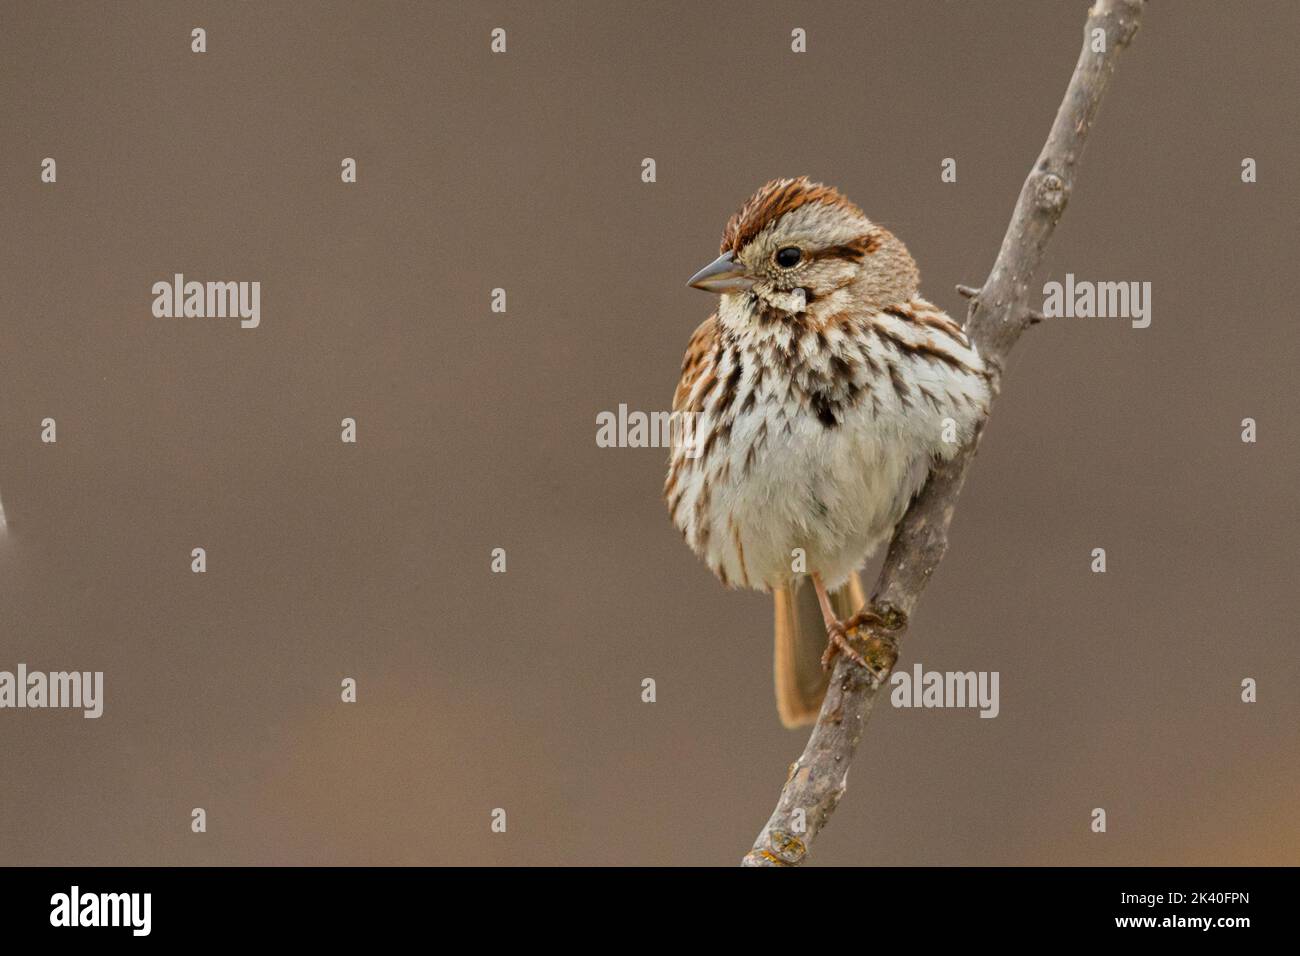 Song sparrow (Melospiza melodia), perched on a branch, Canada, Manitoba, Riding Mountain National Park Stock Photo